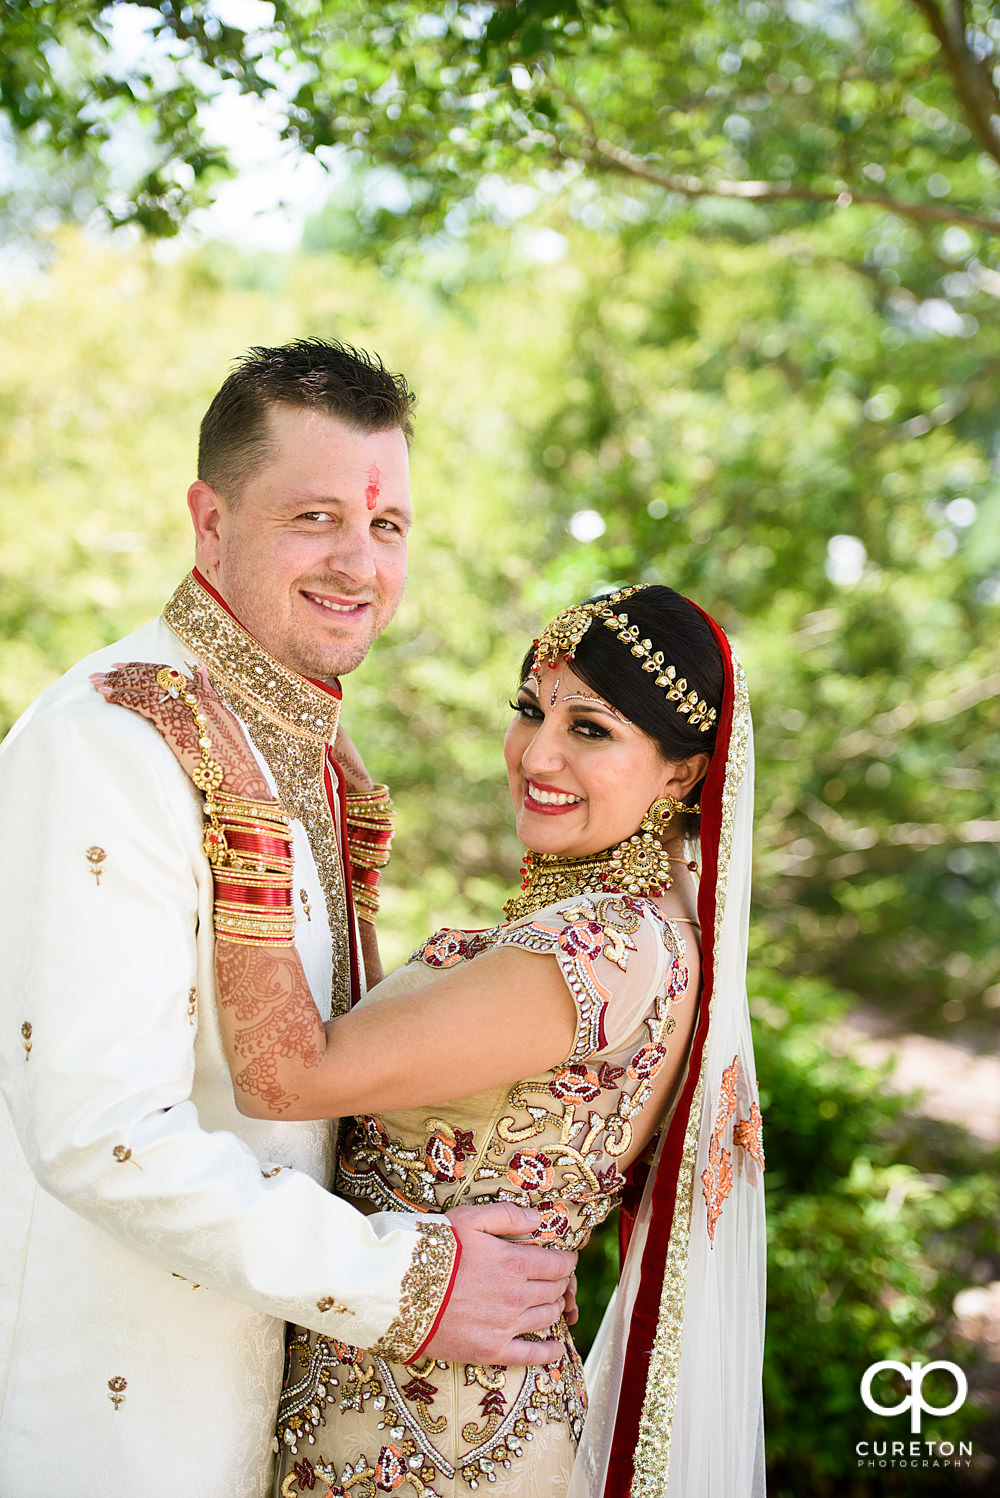 Indian bride and American groom.